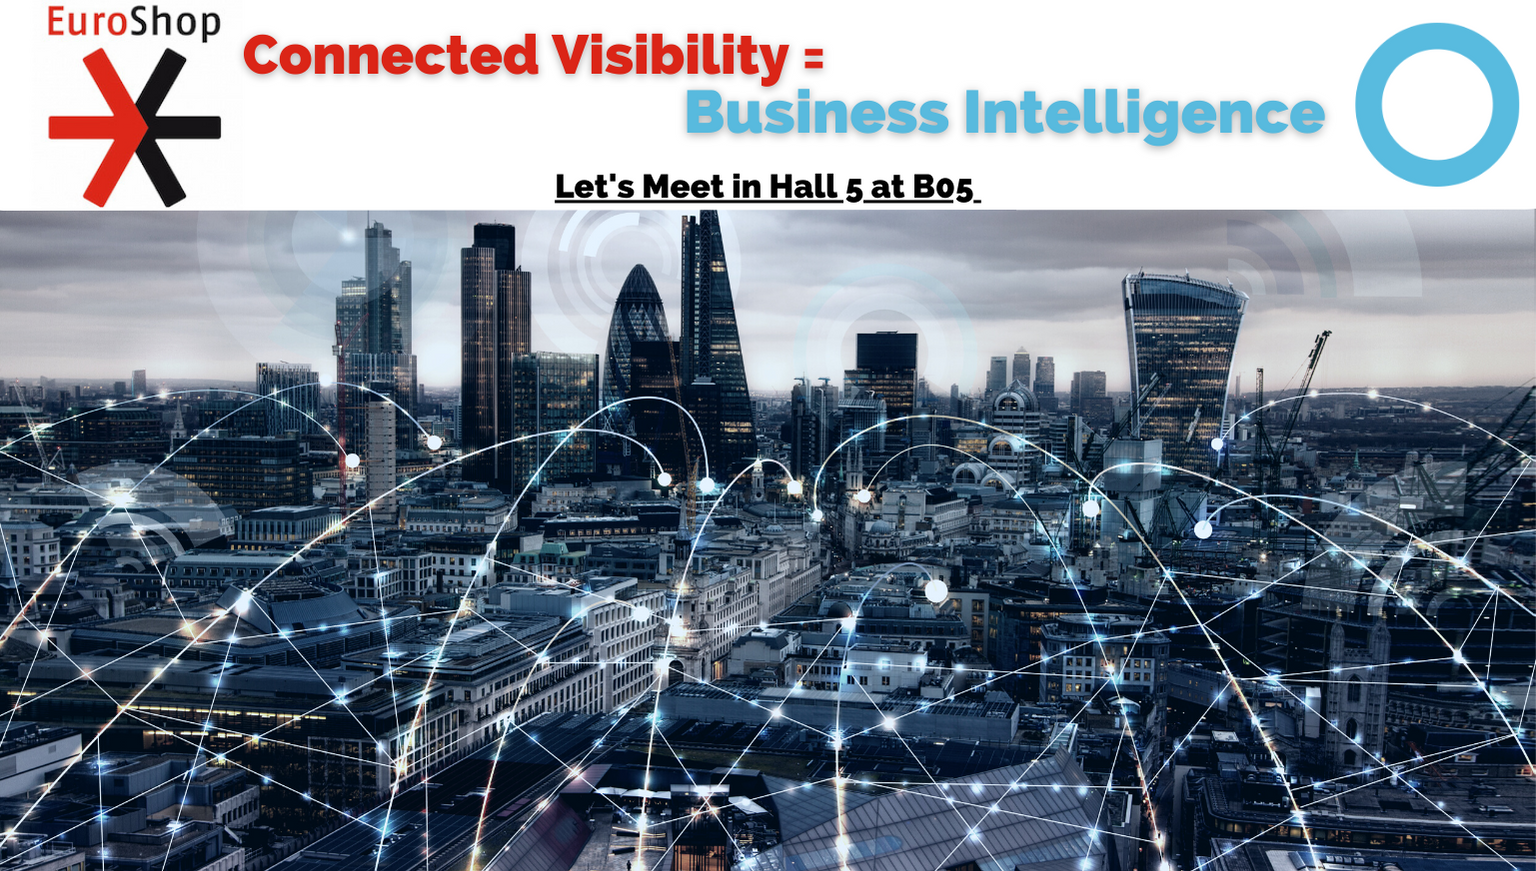 Retail-insights-increase-business-intelligence-visibility-euroshop